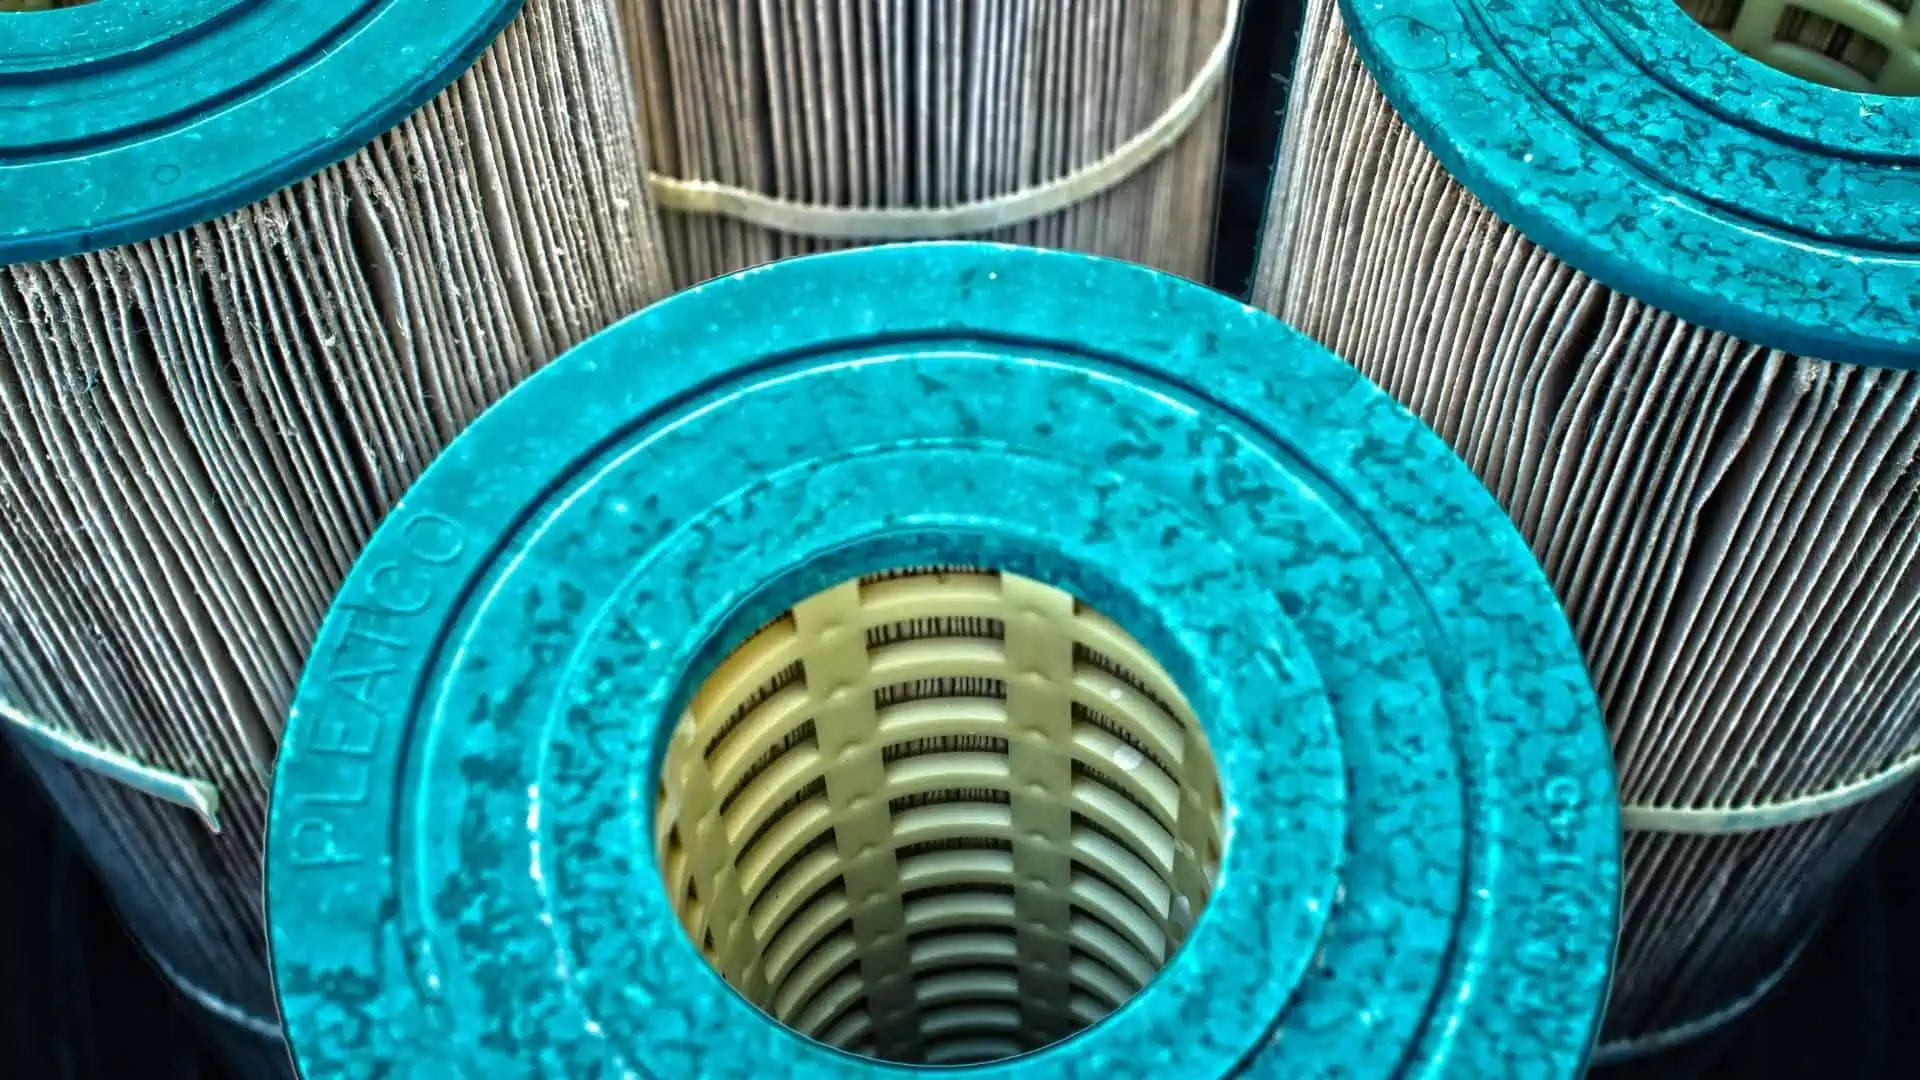 Cartridge Pool Filter Cleaning: What You Need to Know